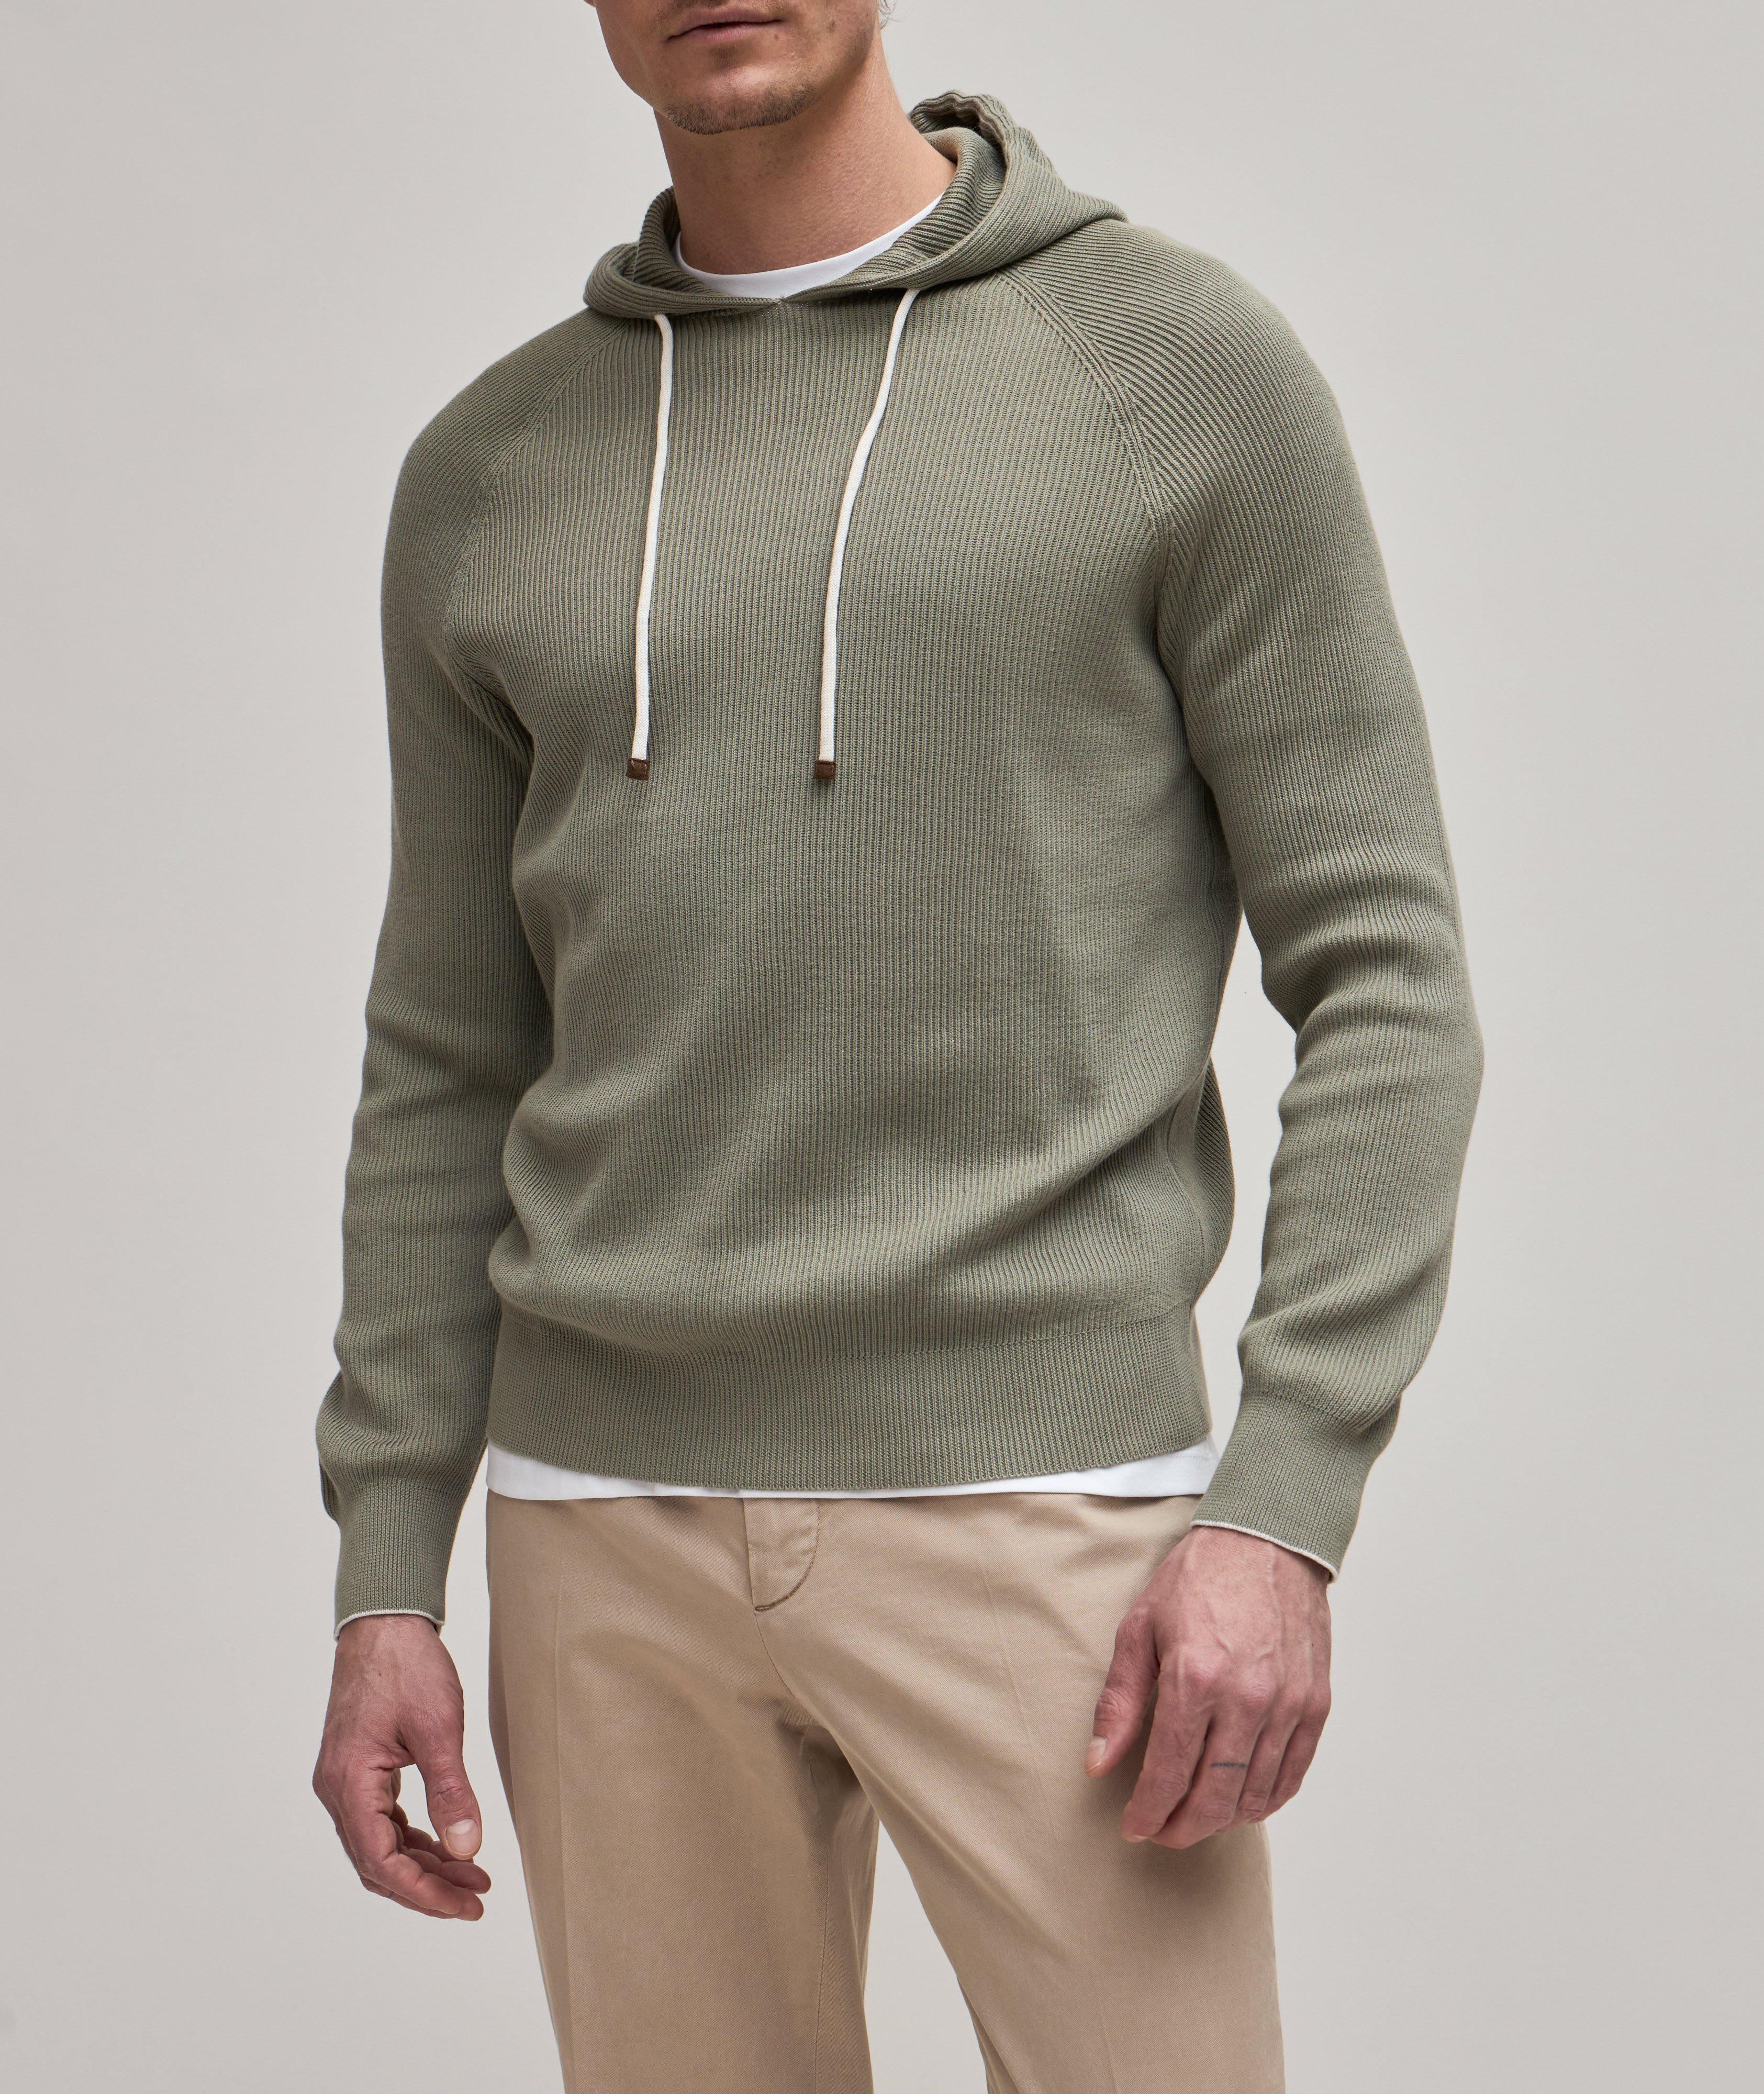 Cotton Rib Knit Hooded Pullover image 2